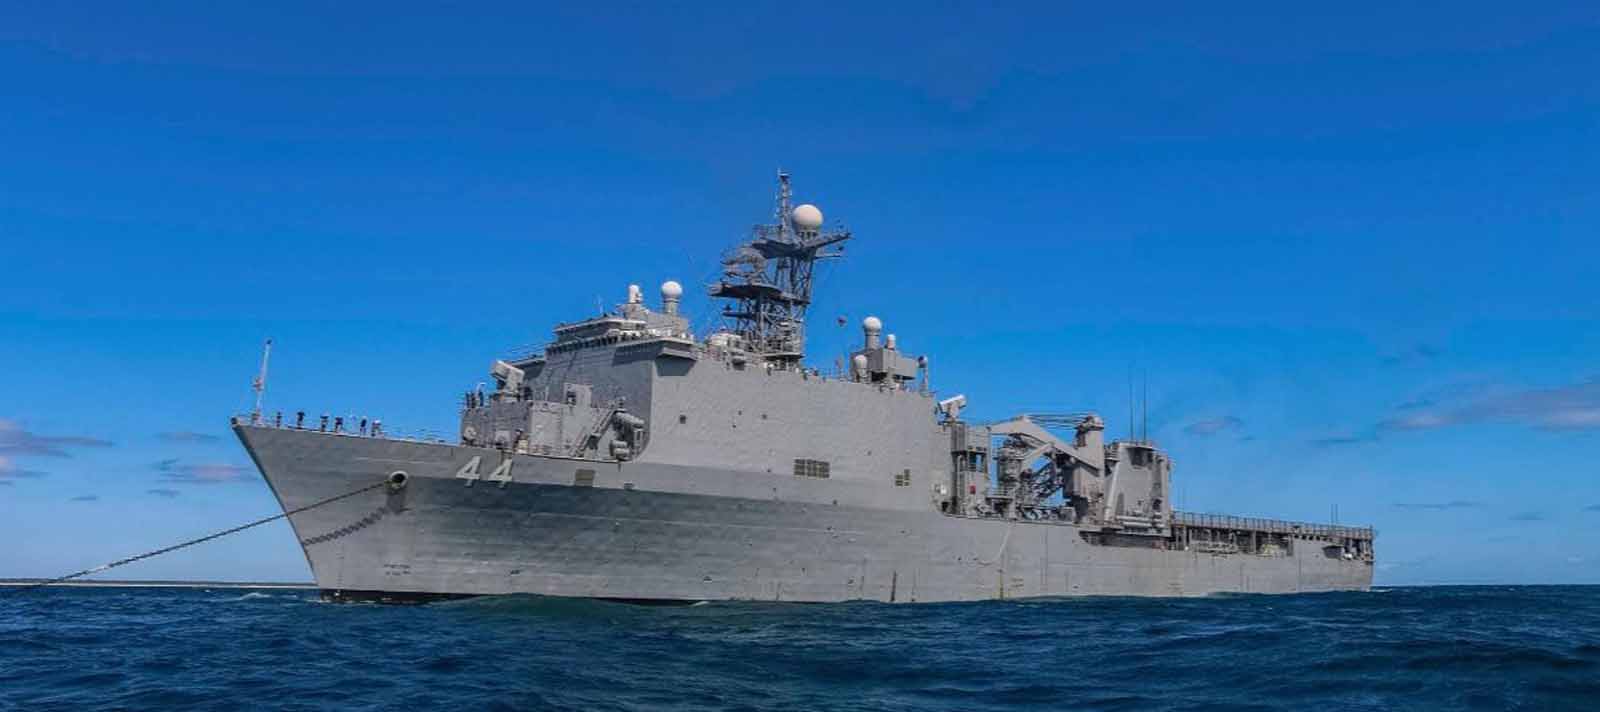 Navy Ship To Be Present During Mardi Gras